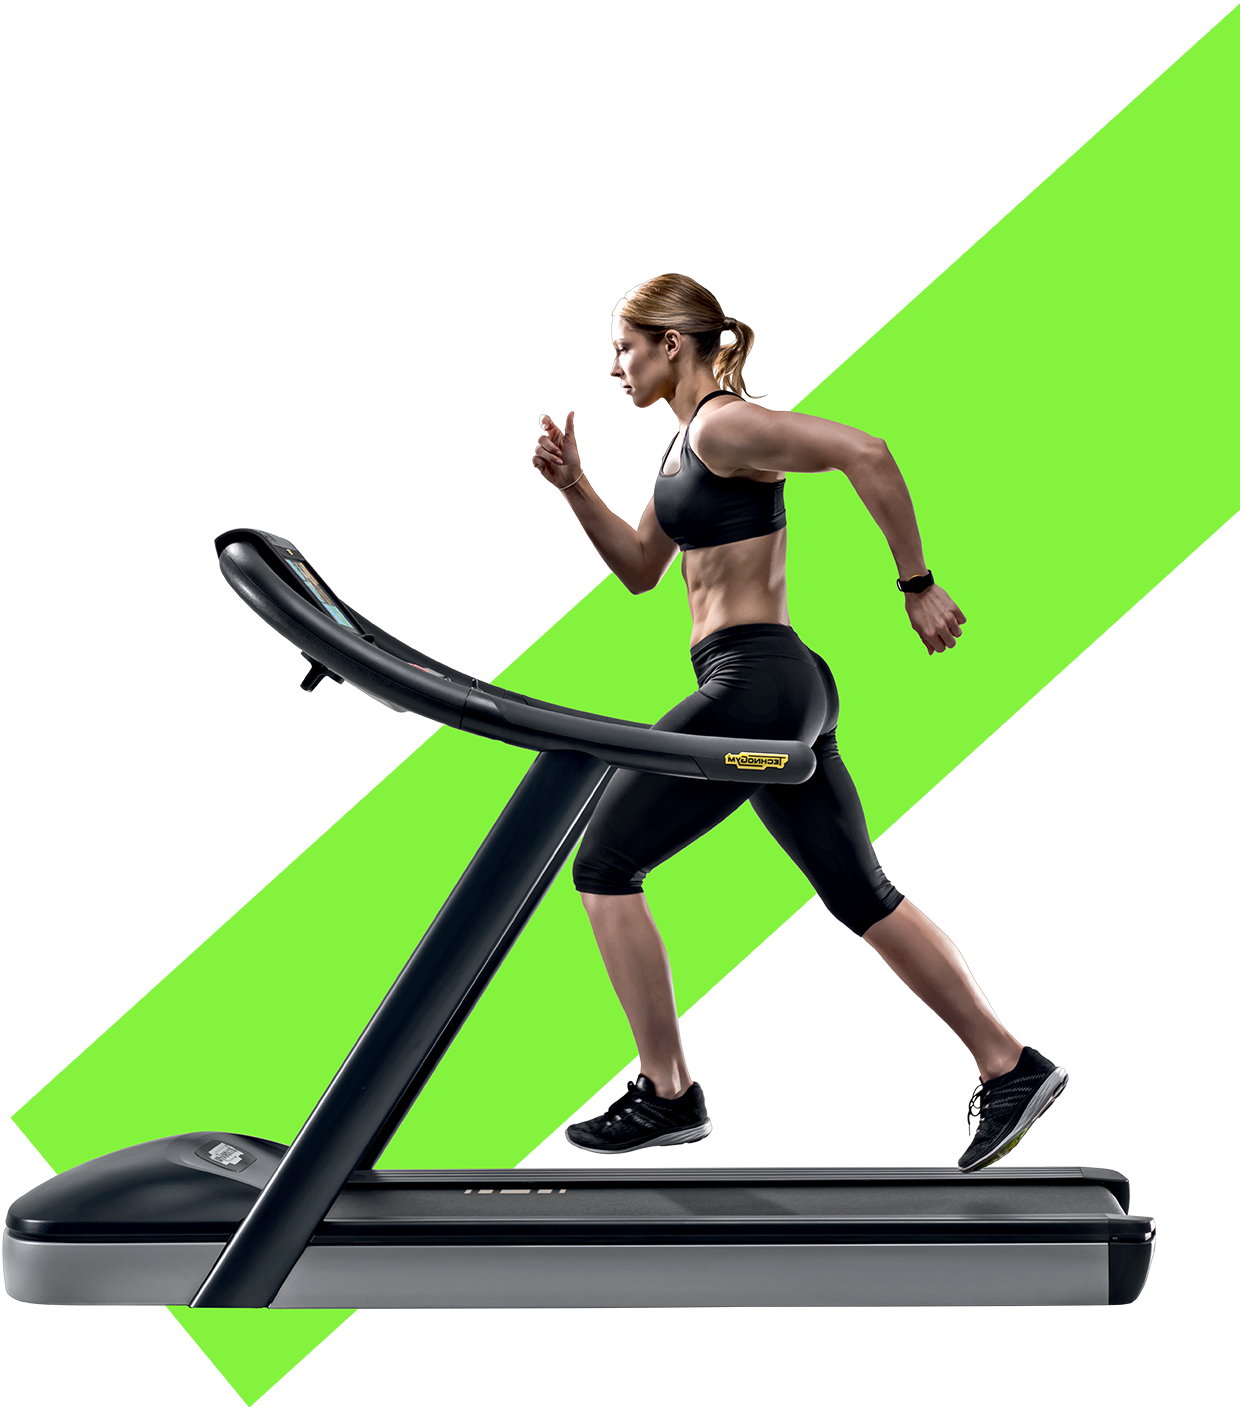 Exercise clipart ladies fitness. Gym png transparent images